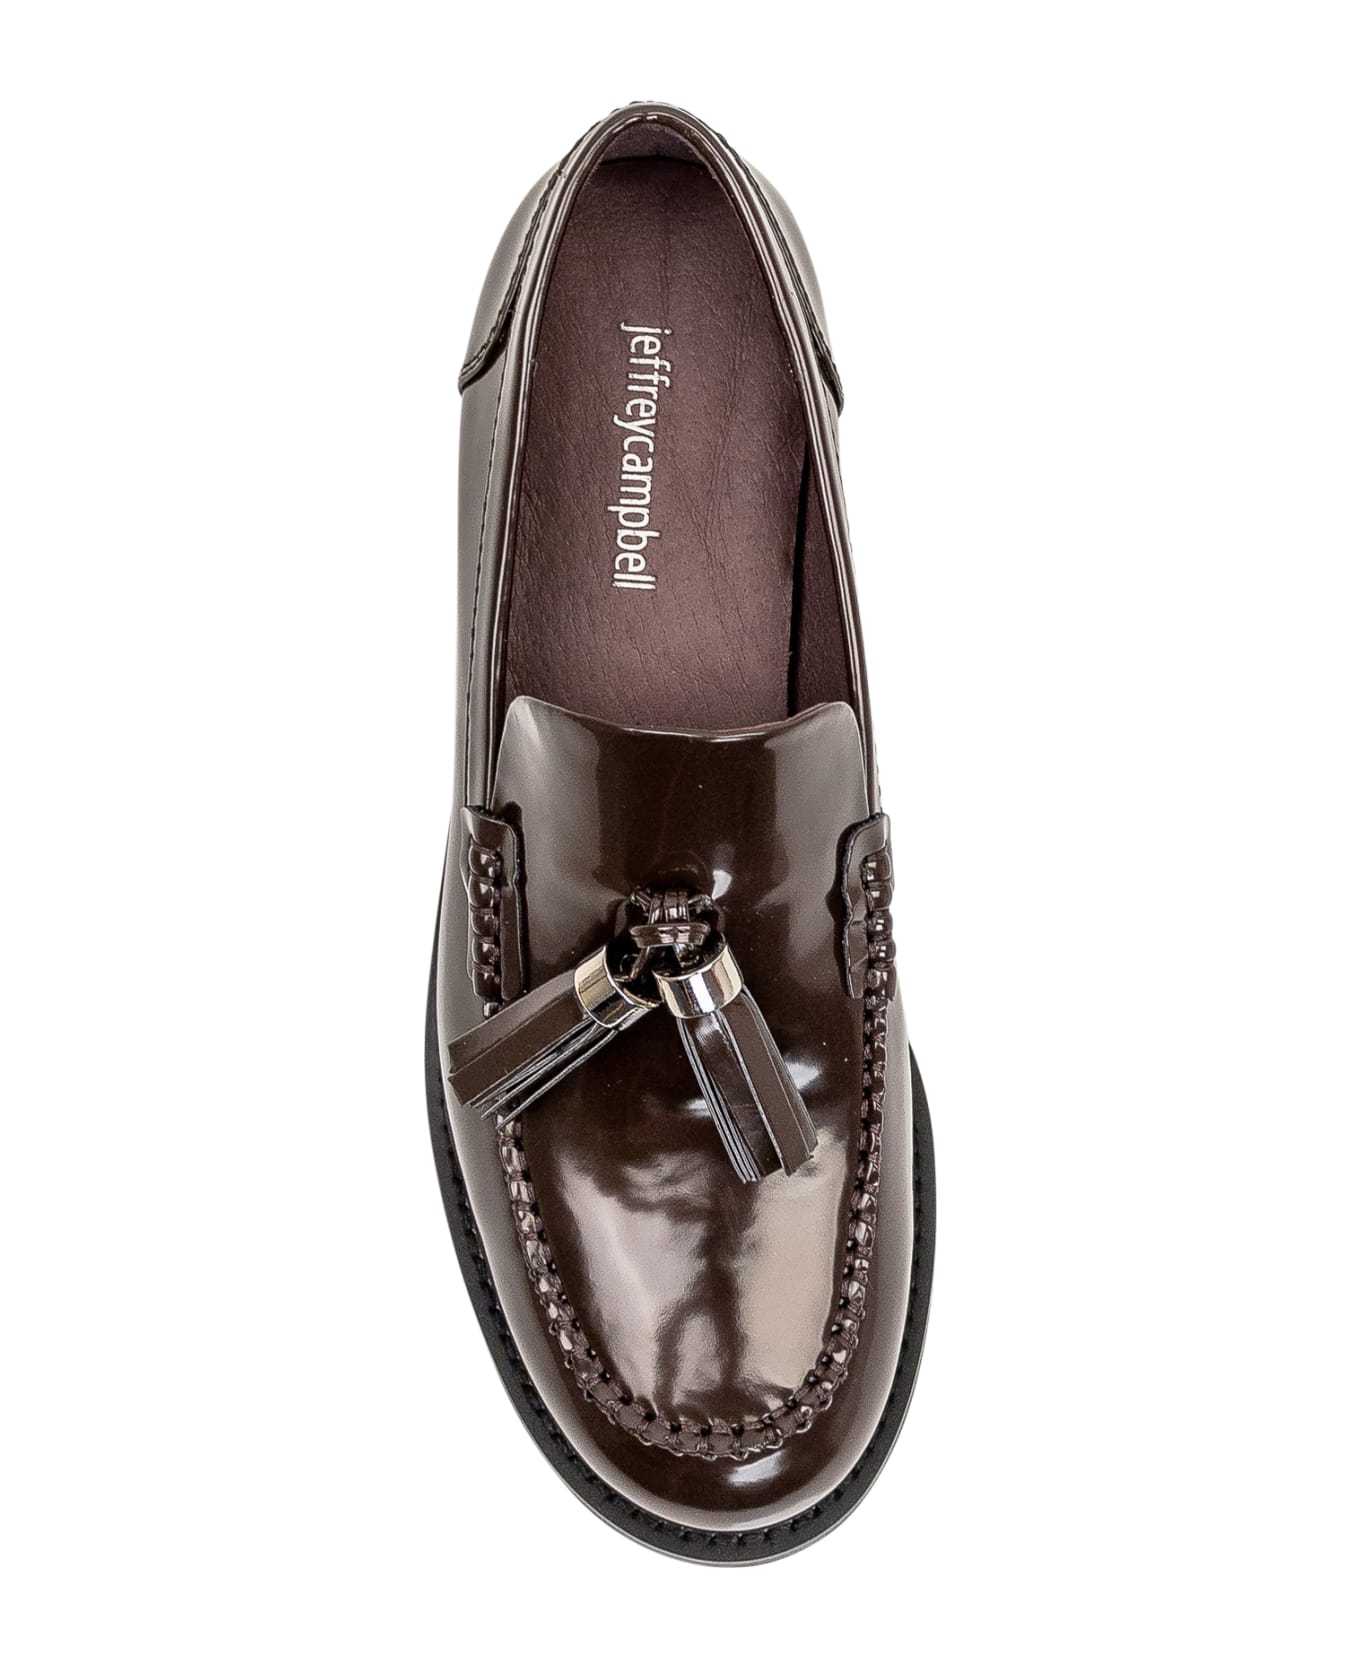 Jeffrey Campbell Lecture Loafer - BROWN